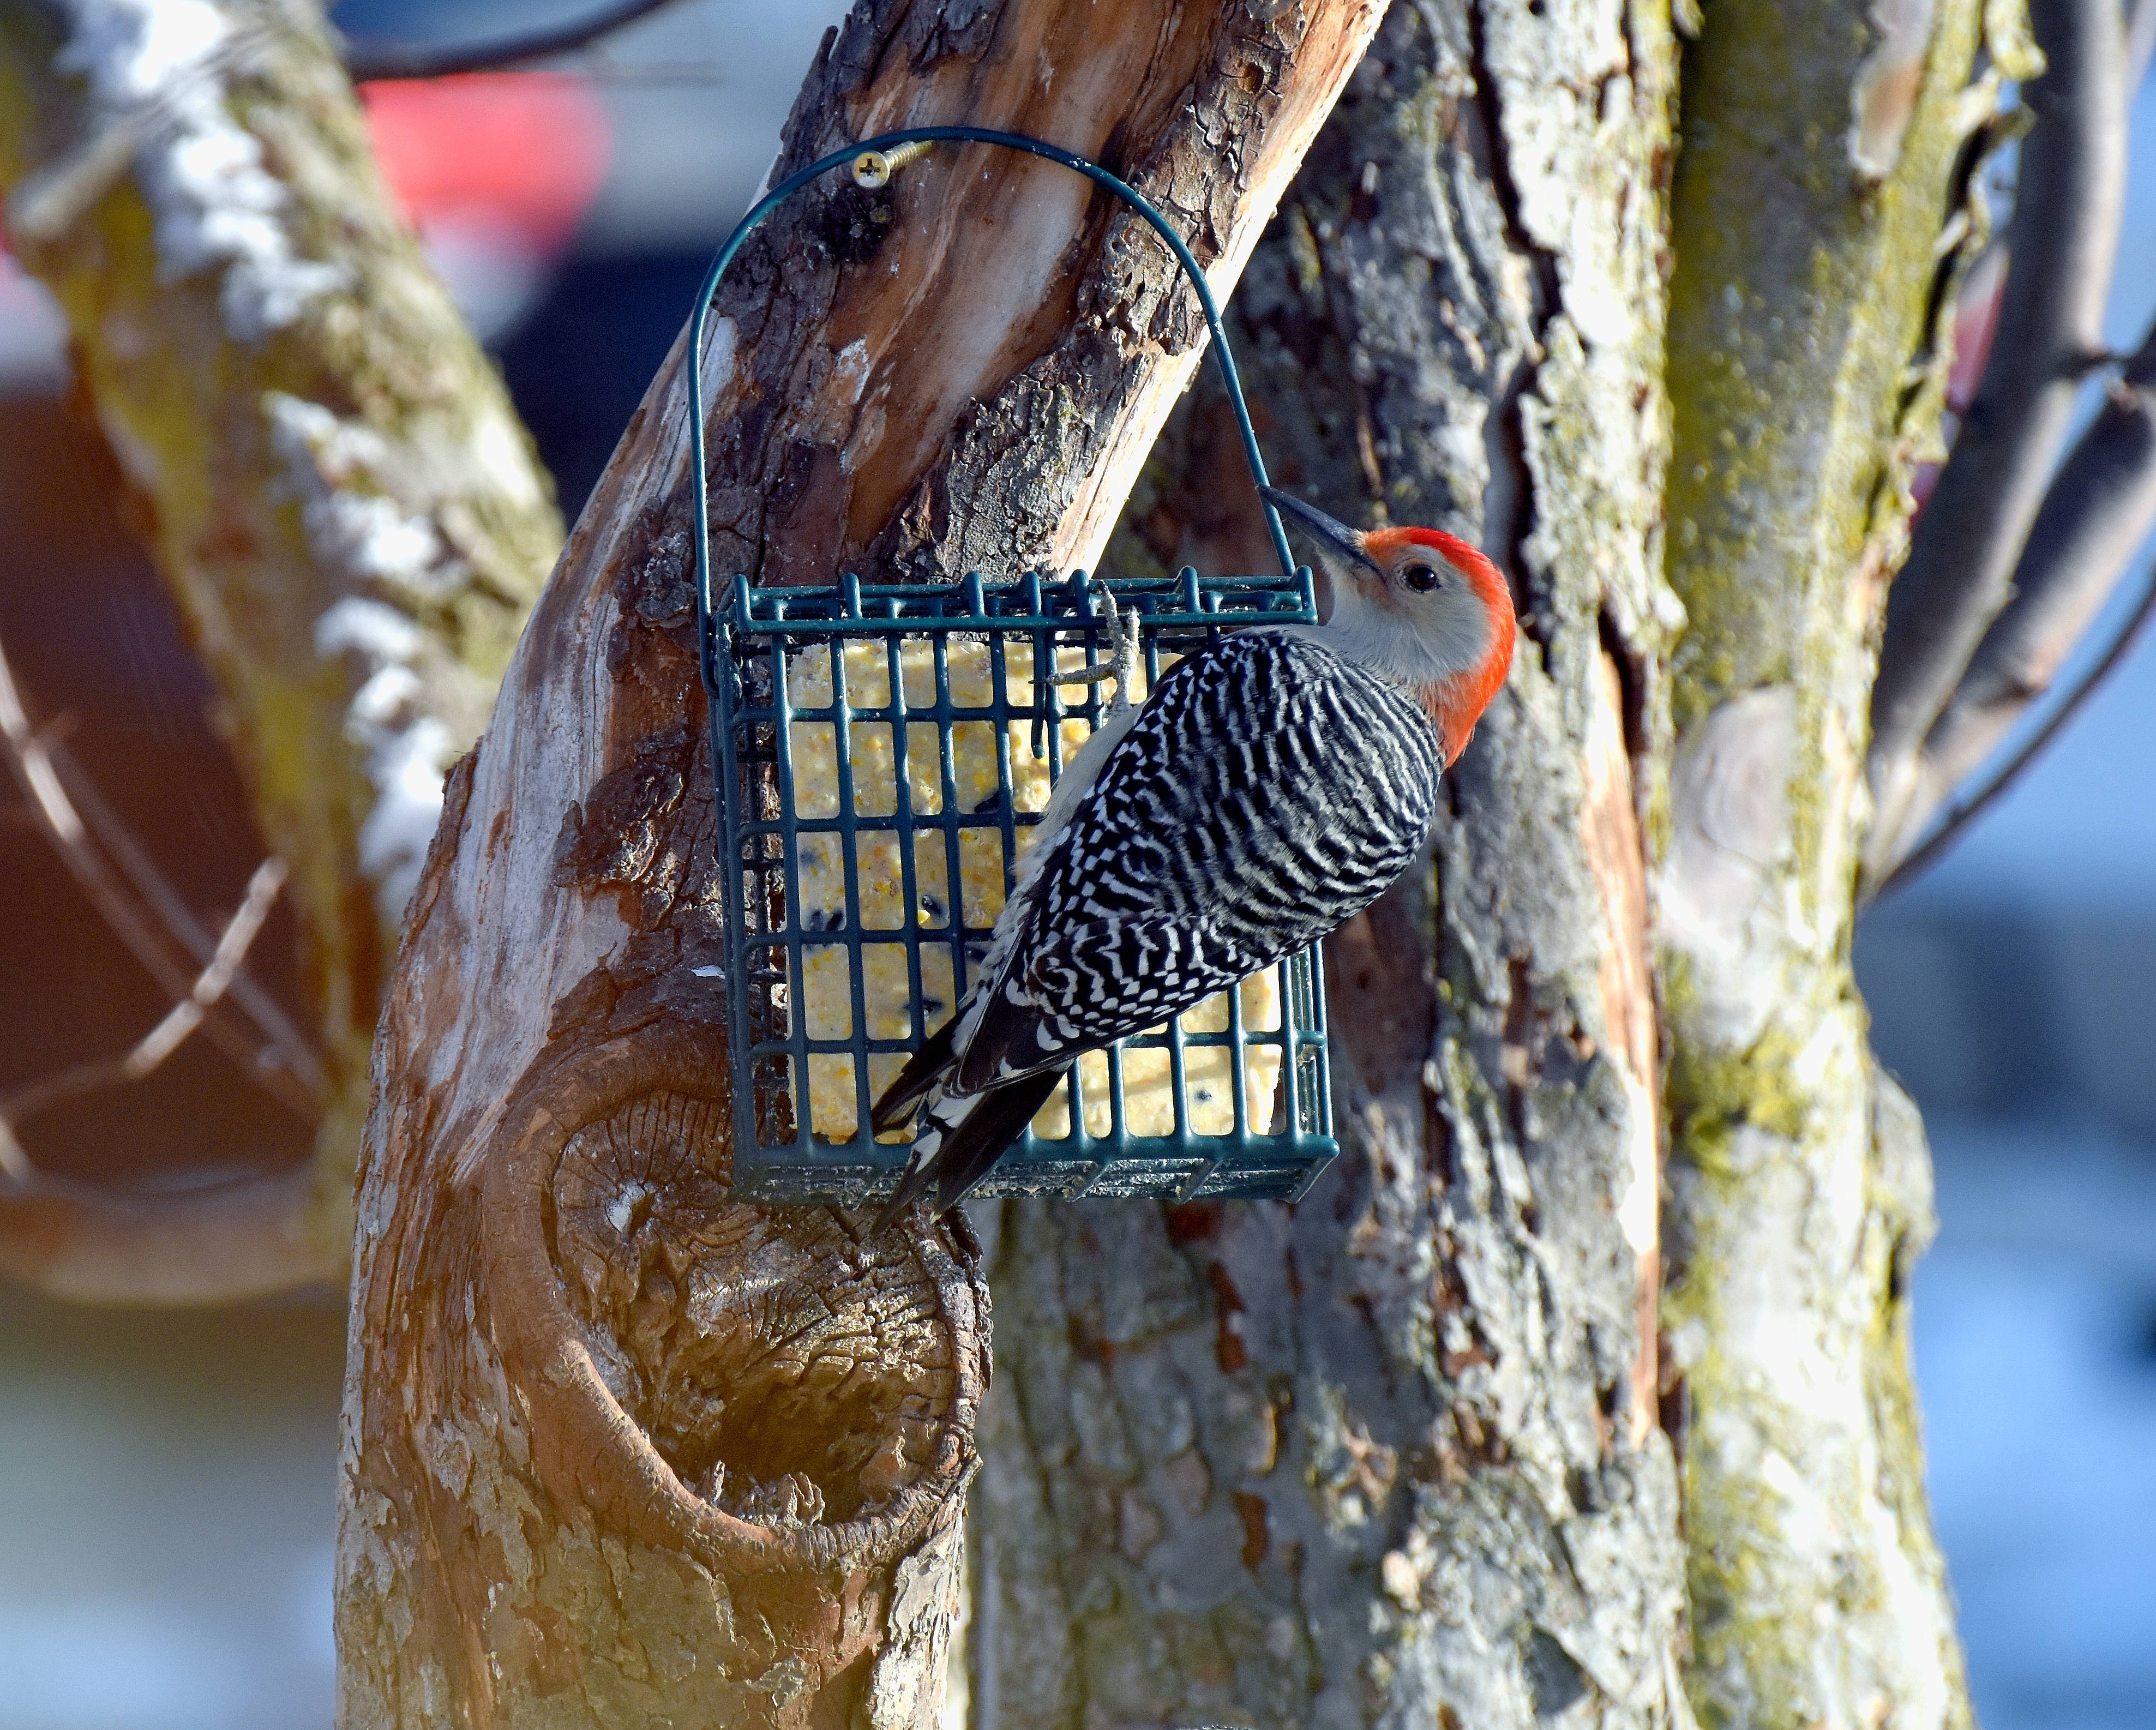 A Red bellied woodpecker | image tagged in bird,kewlew,red bellied woodpecker | made w/ Imgflip meme maker